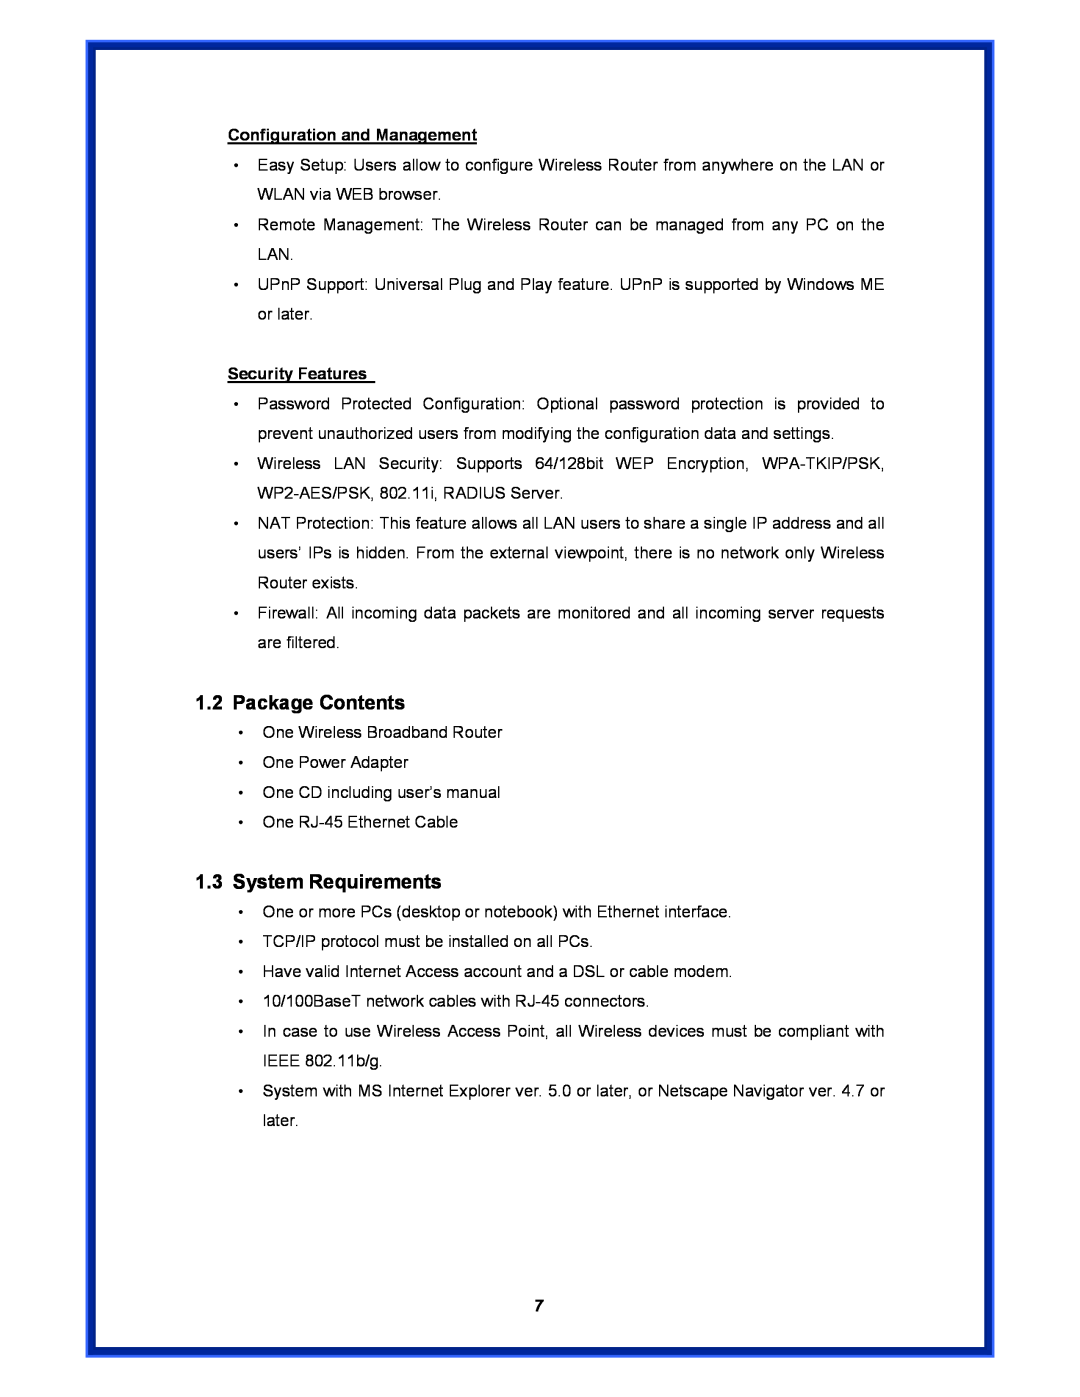 Advantek Networks AWR-MIMO-54RA user manual Configuration and Management, Security Features 